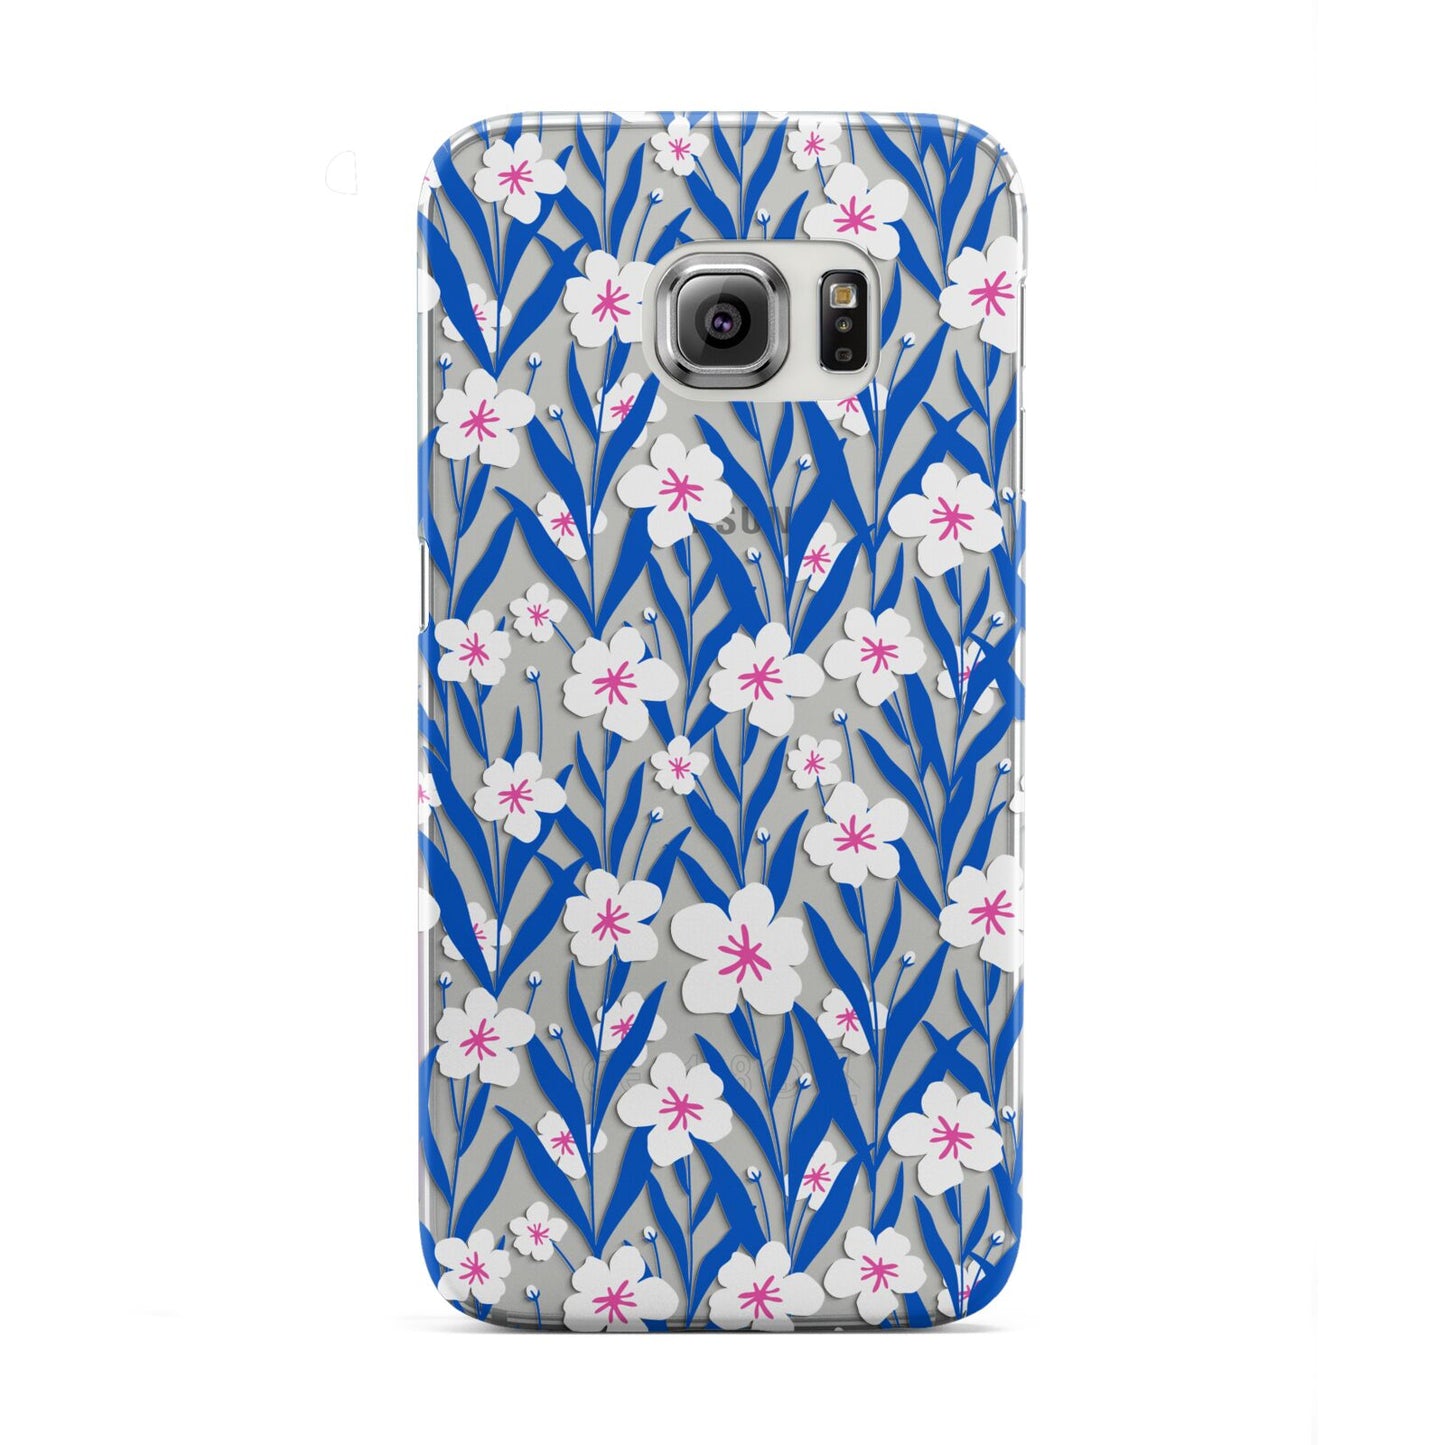 Blue and White Flowers Samsung Galaxy S6 Edge Case